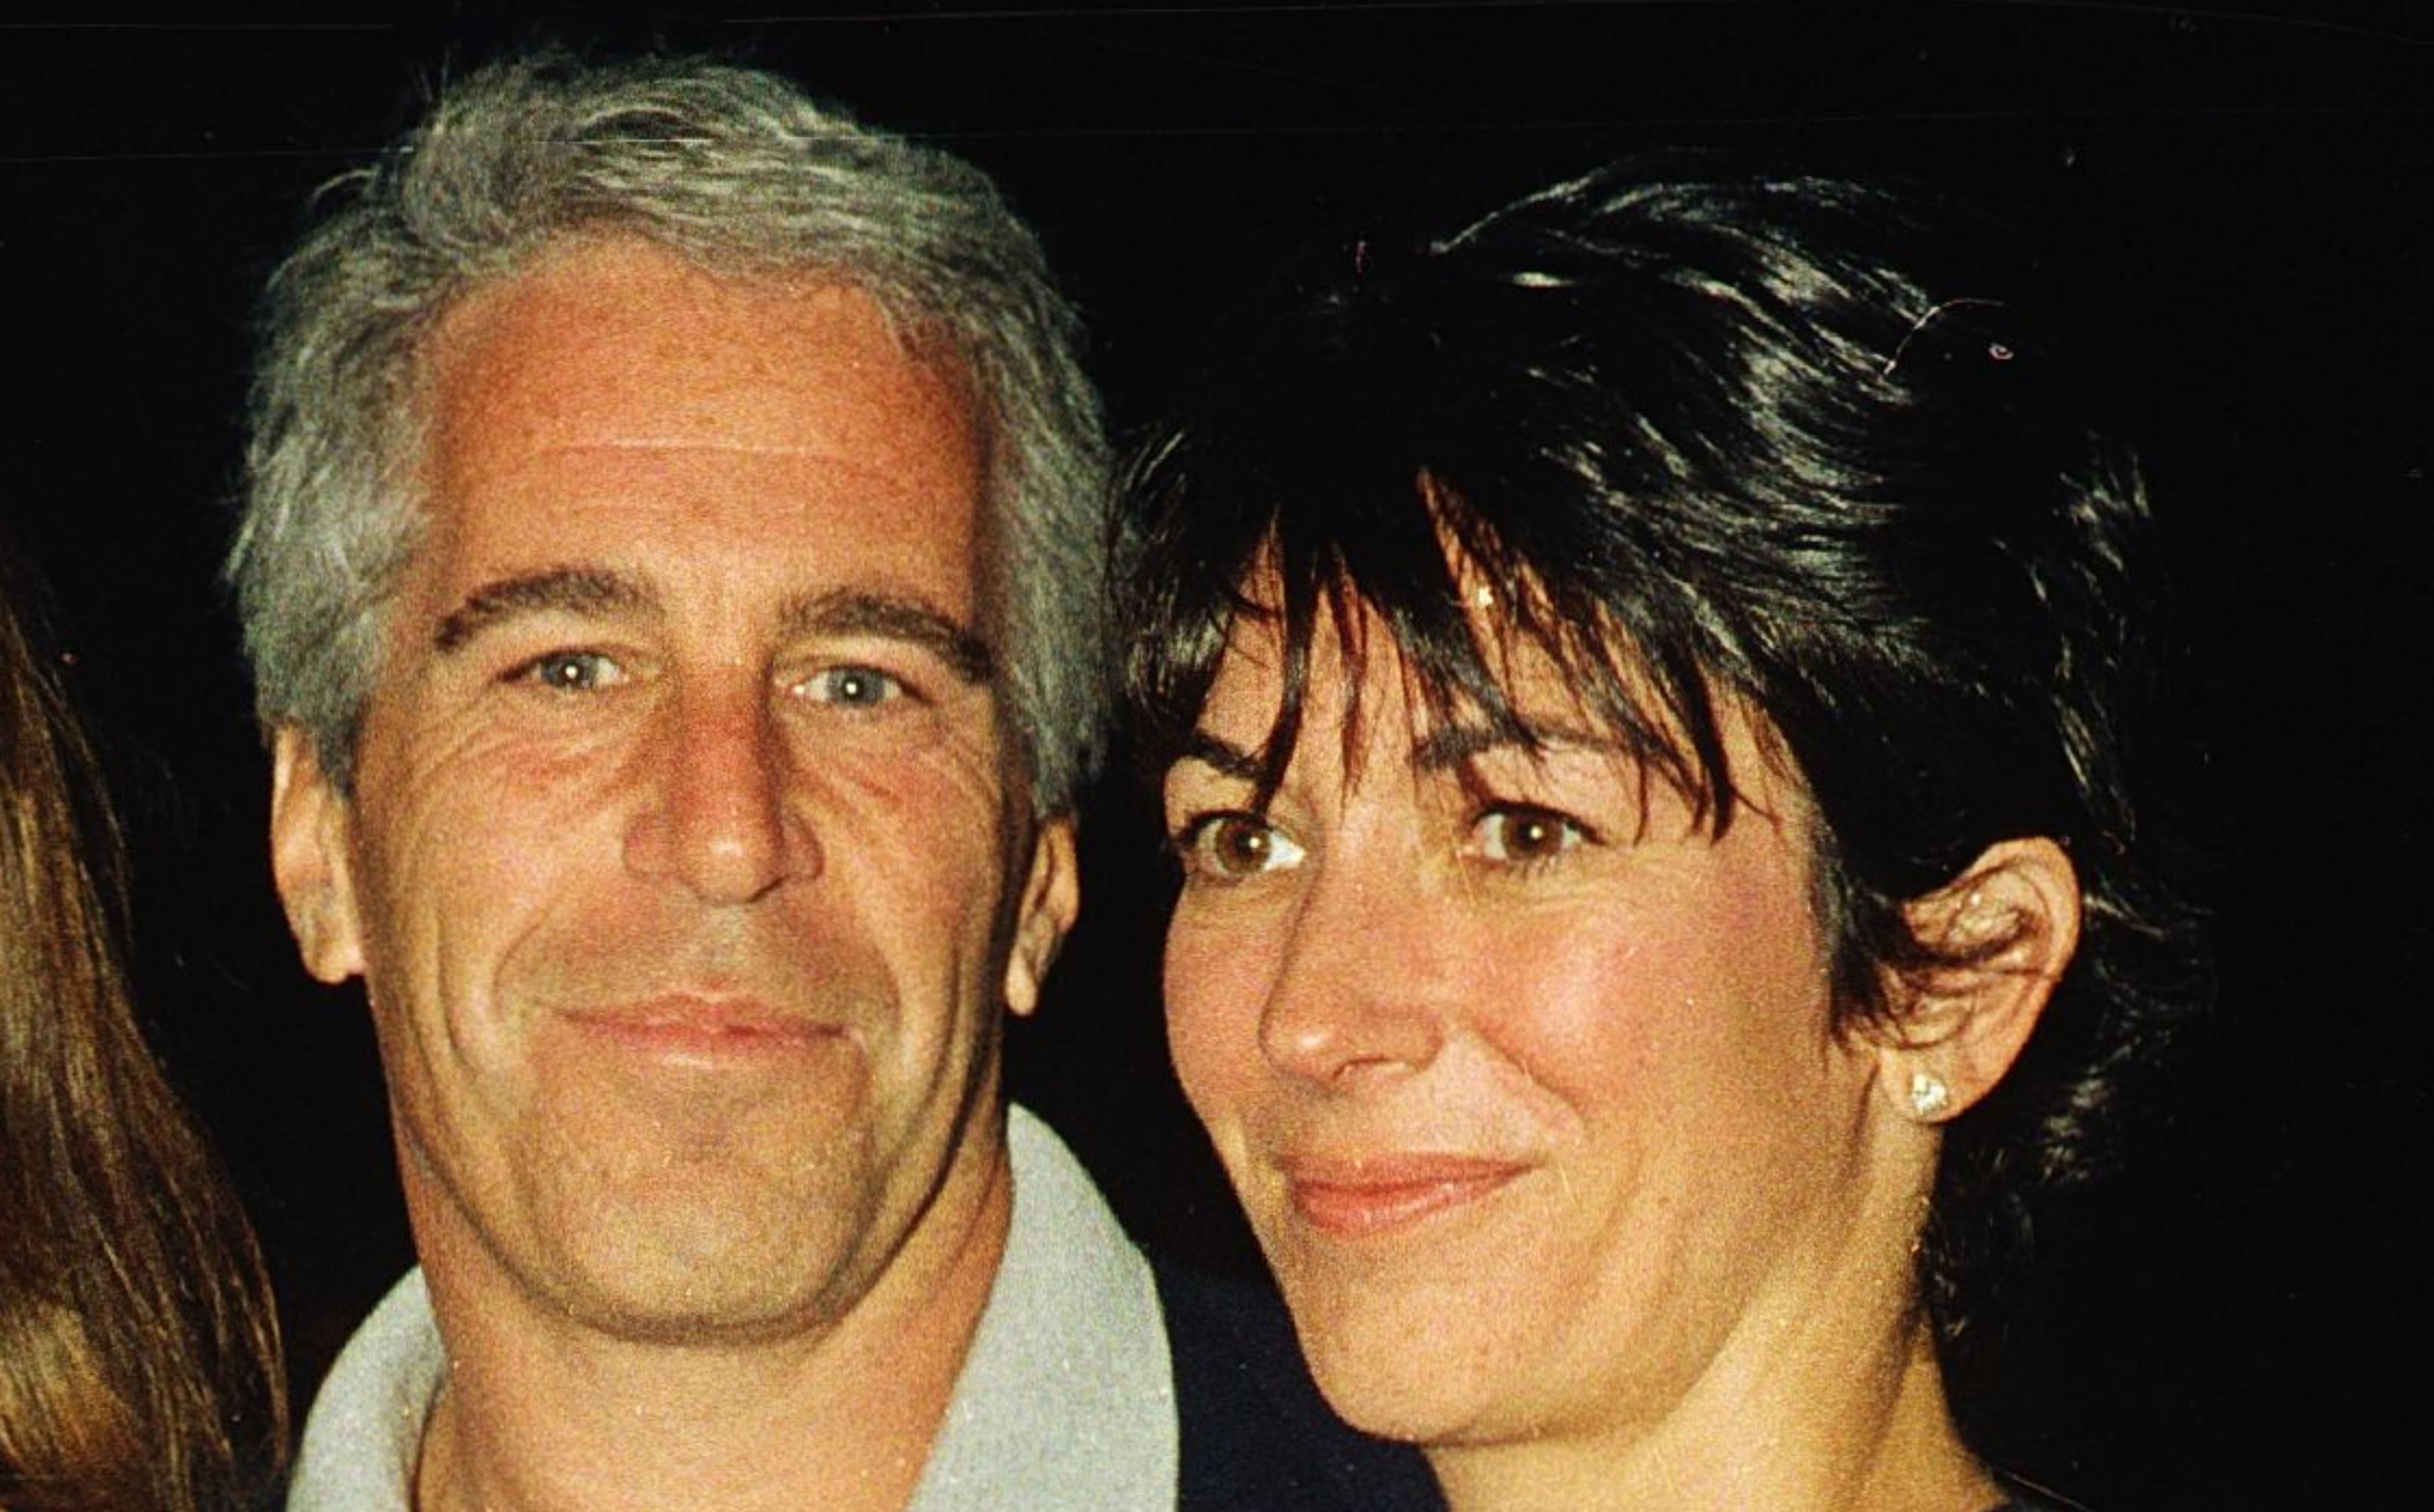 Ghislaine Maxwell Advised Massages For Jeffrey Epstein as 'Excellent Job Opportunity'